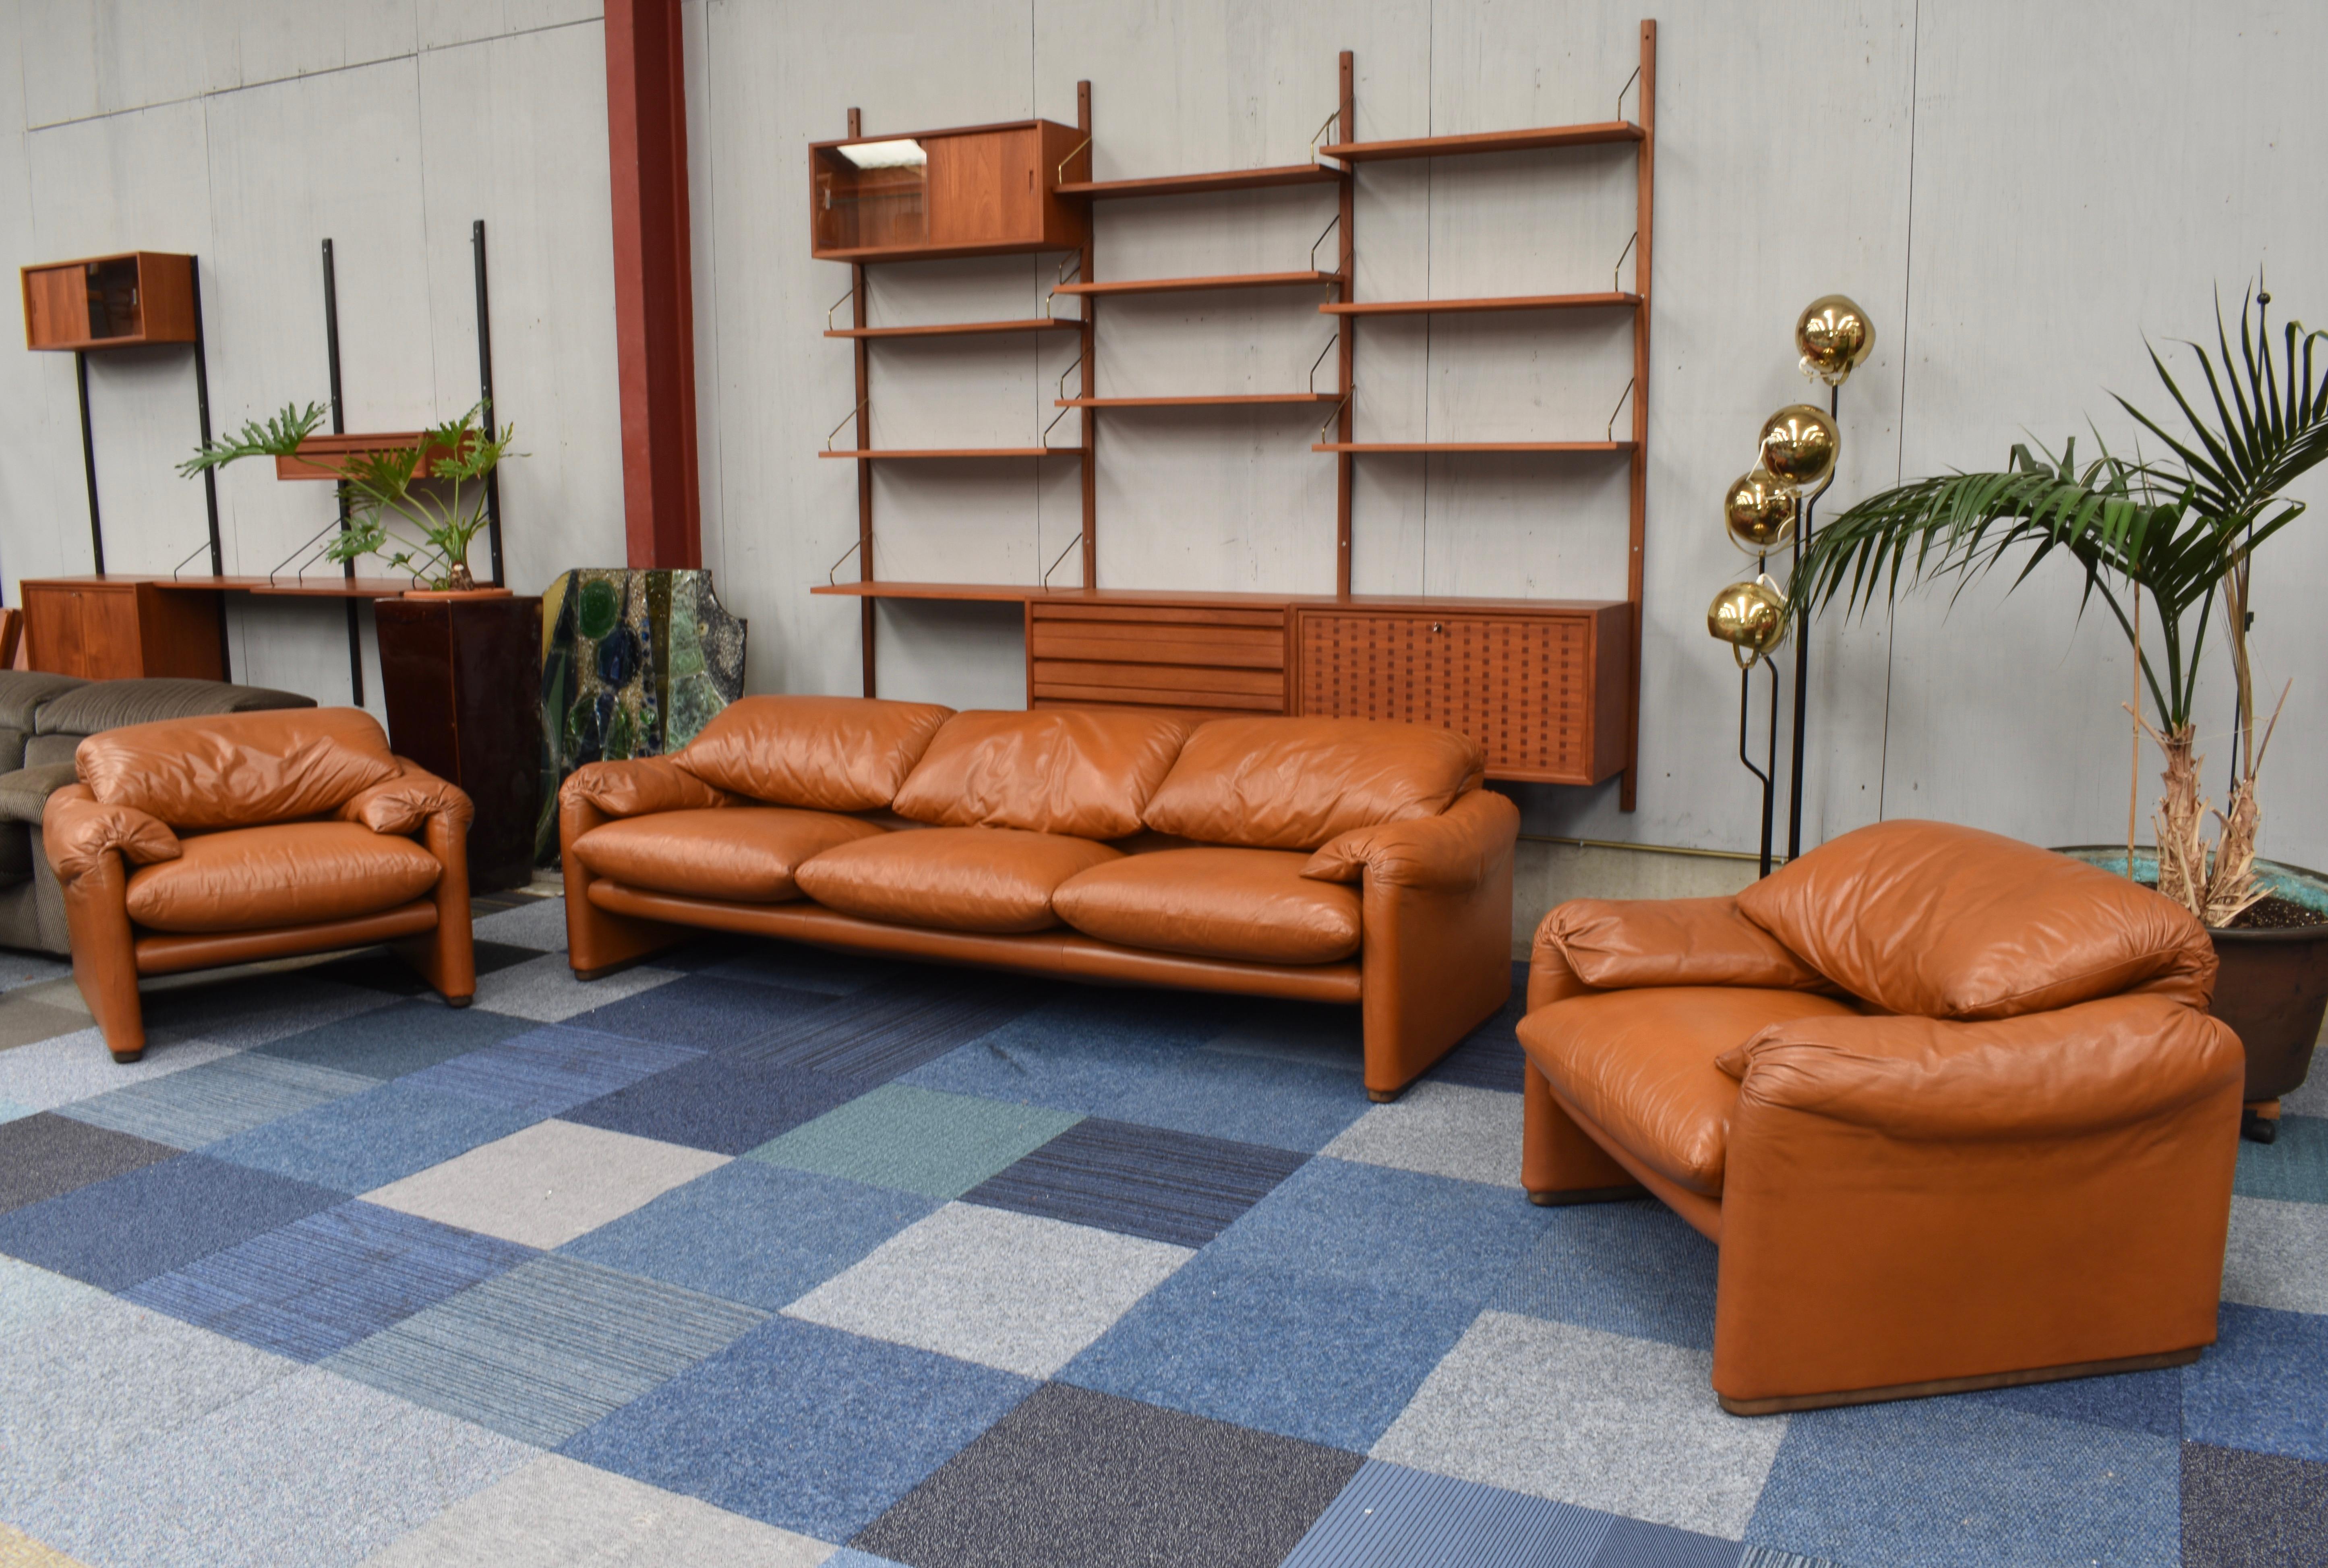 Very early edition Maralunga sofa by Vico Magistretti for Cassina – 1973.

The sofa is made in tan colored leather and has wood legs. The extractable head-rests work but the mechanisms are a bit weak. The leather has age related patina but still